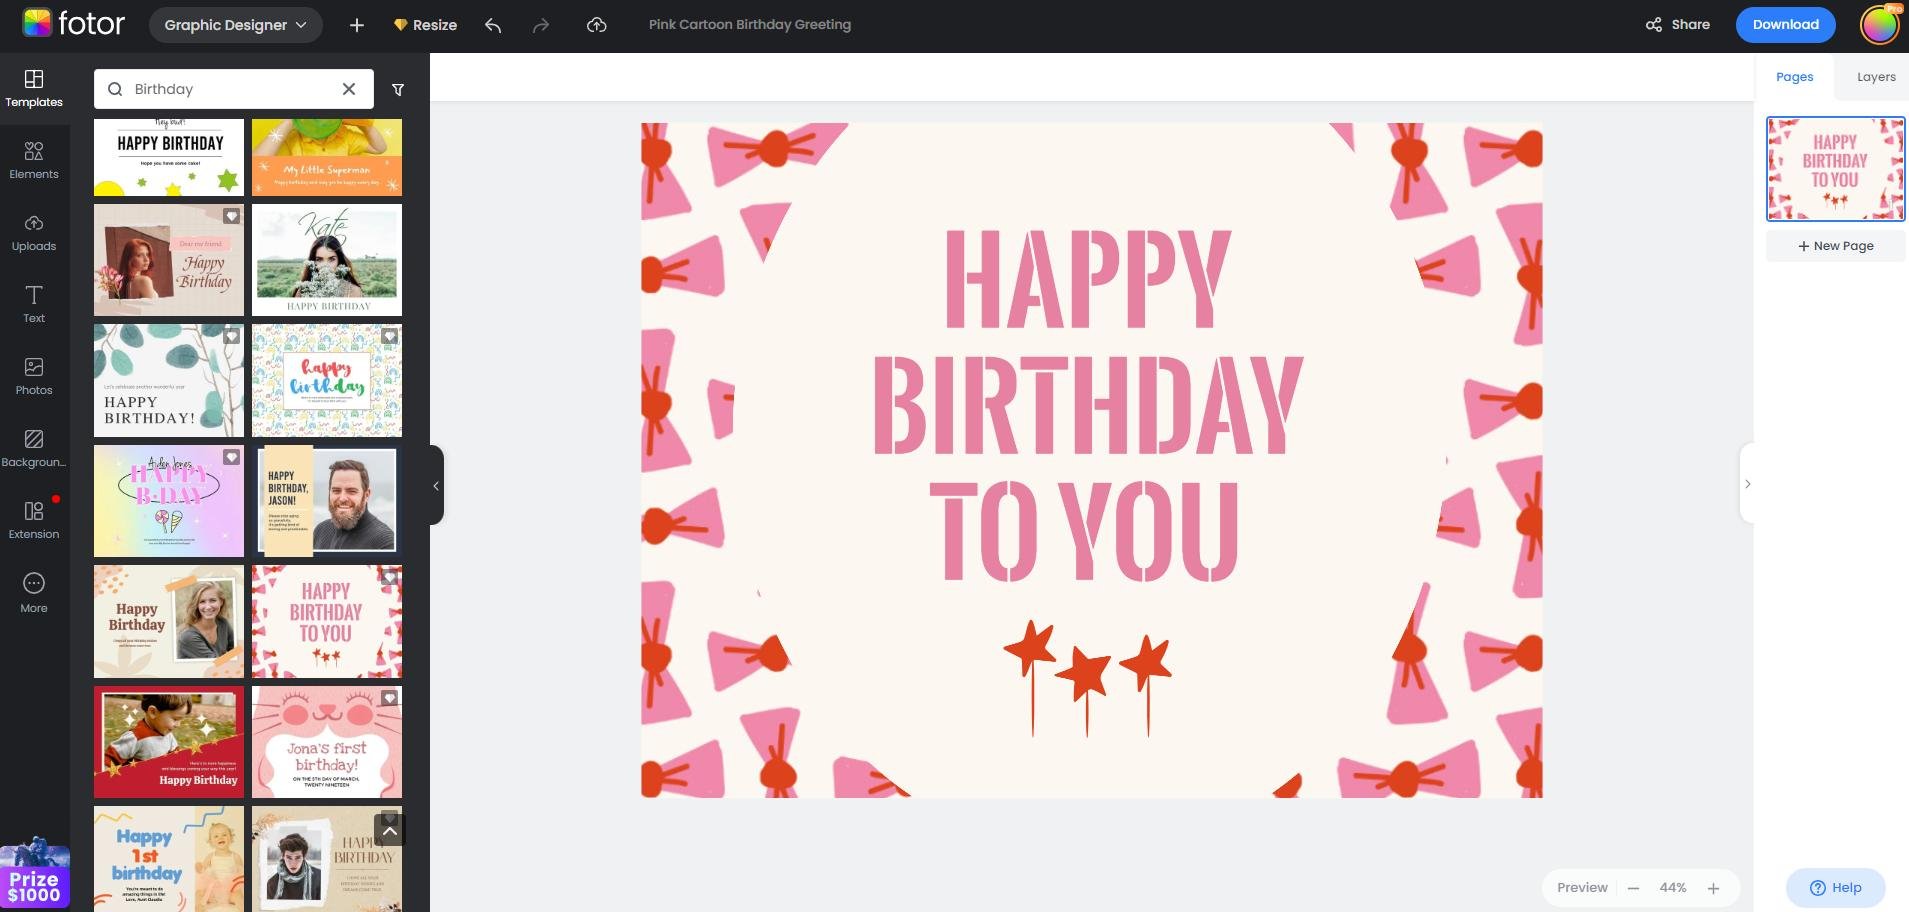 make a birthday card in fotor's online card maker